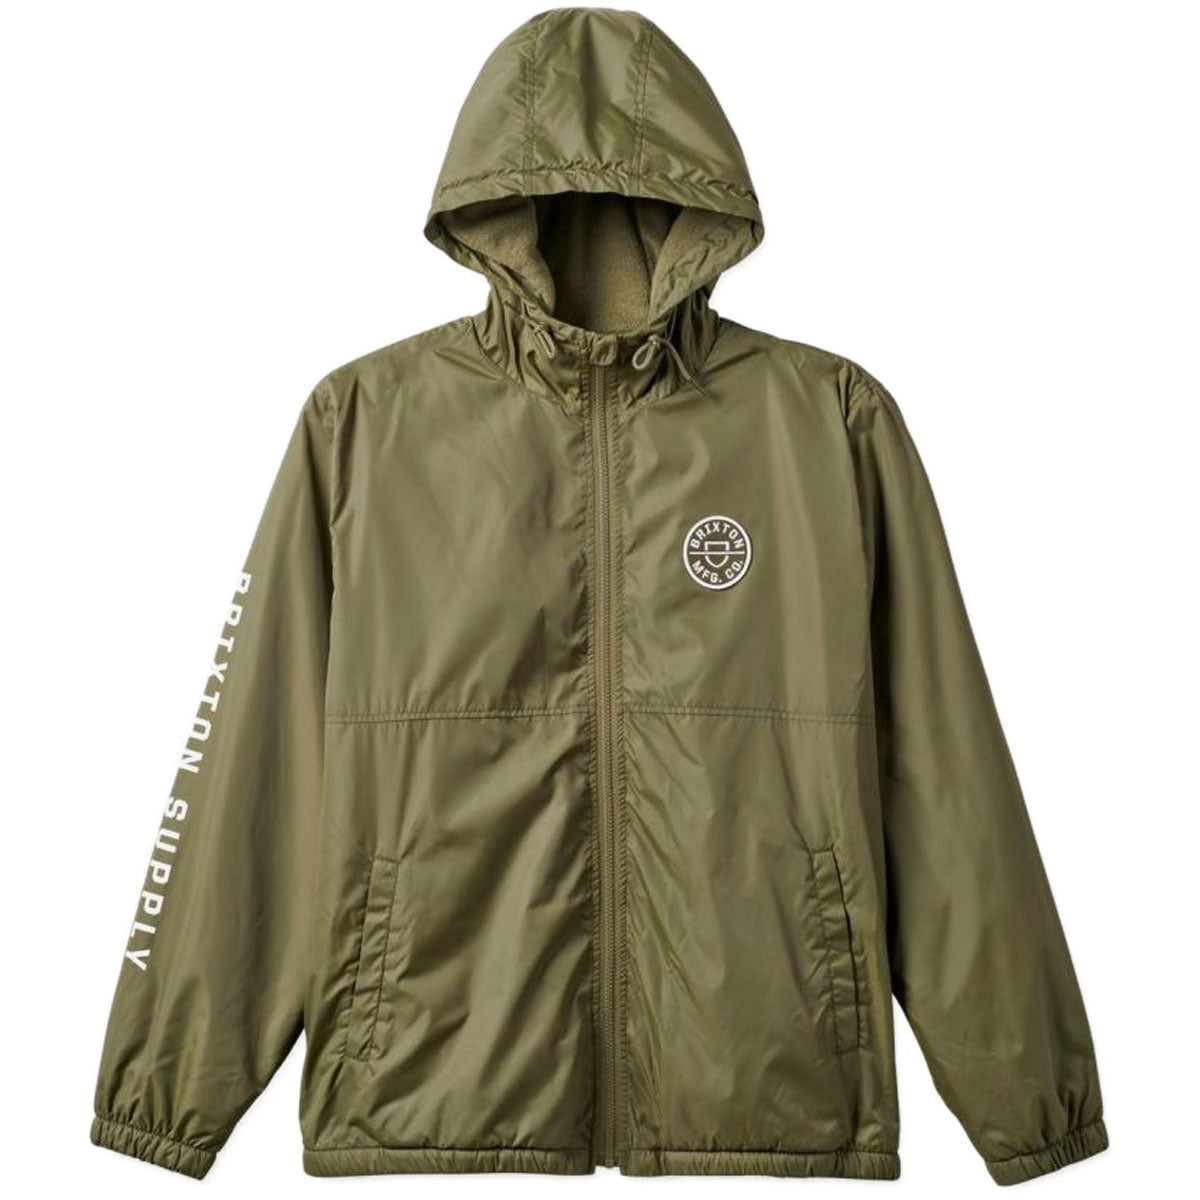 Brixton Claxton Crest Lined Jacket - Military Olive image 2